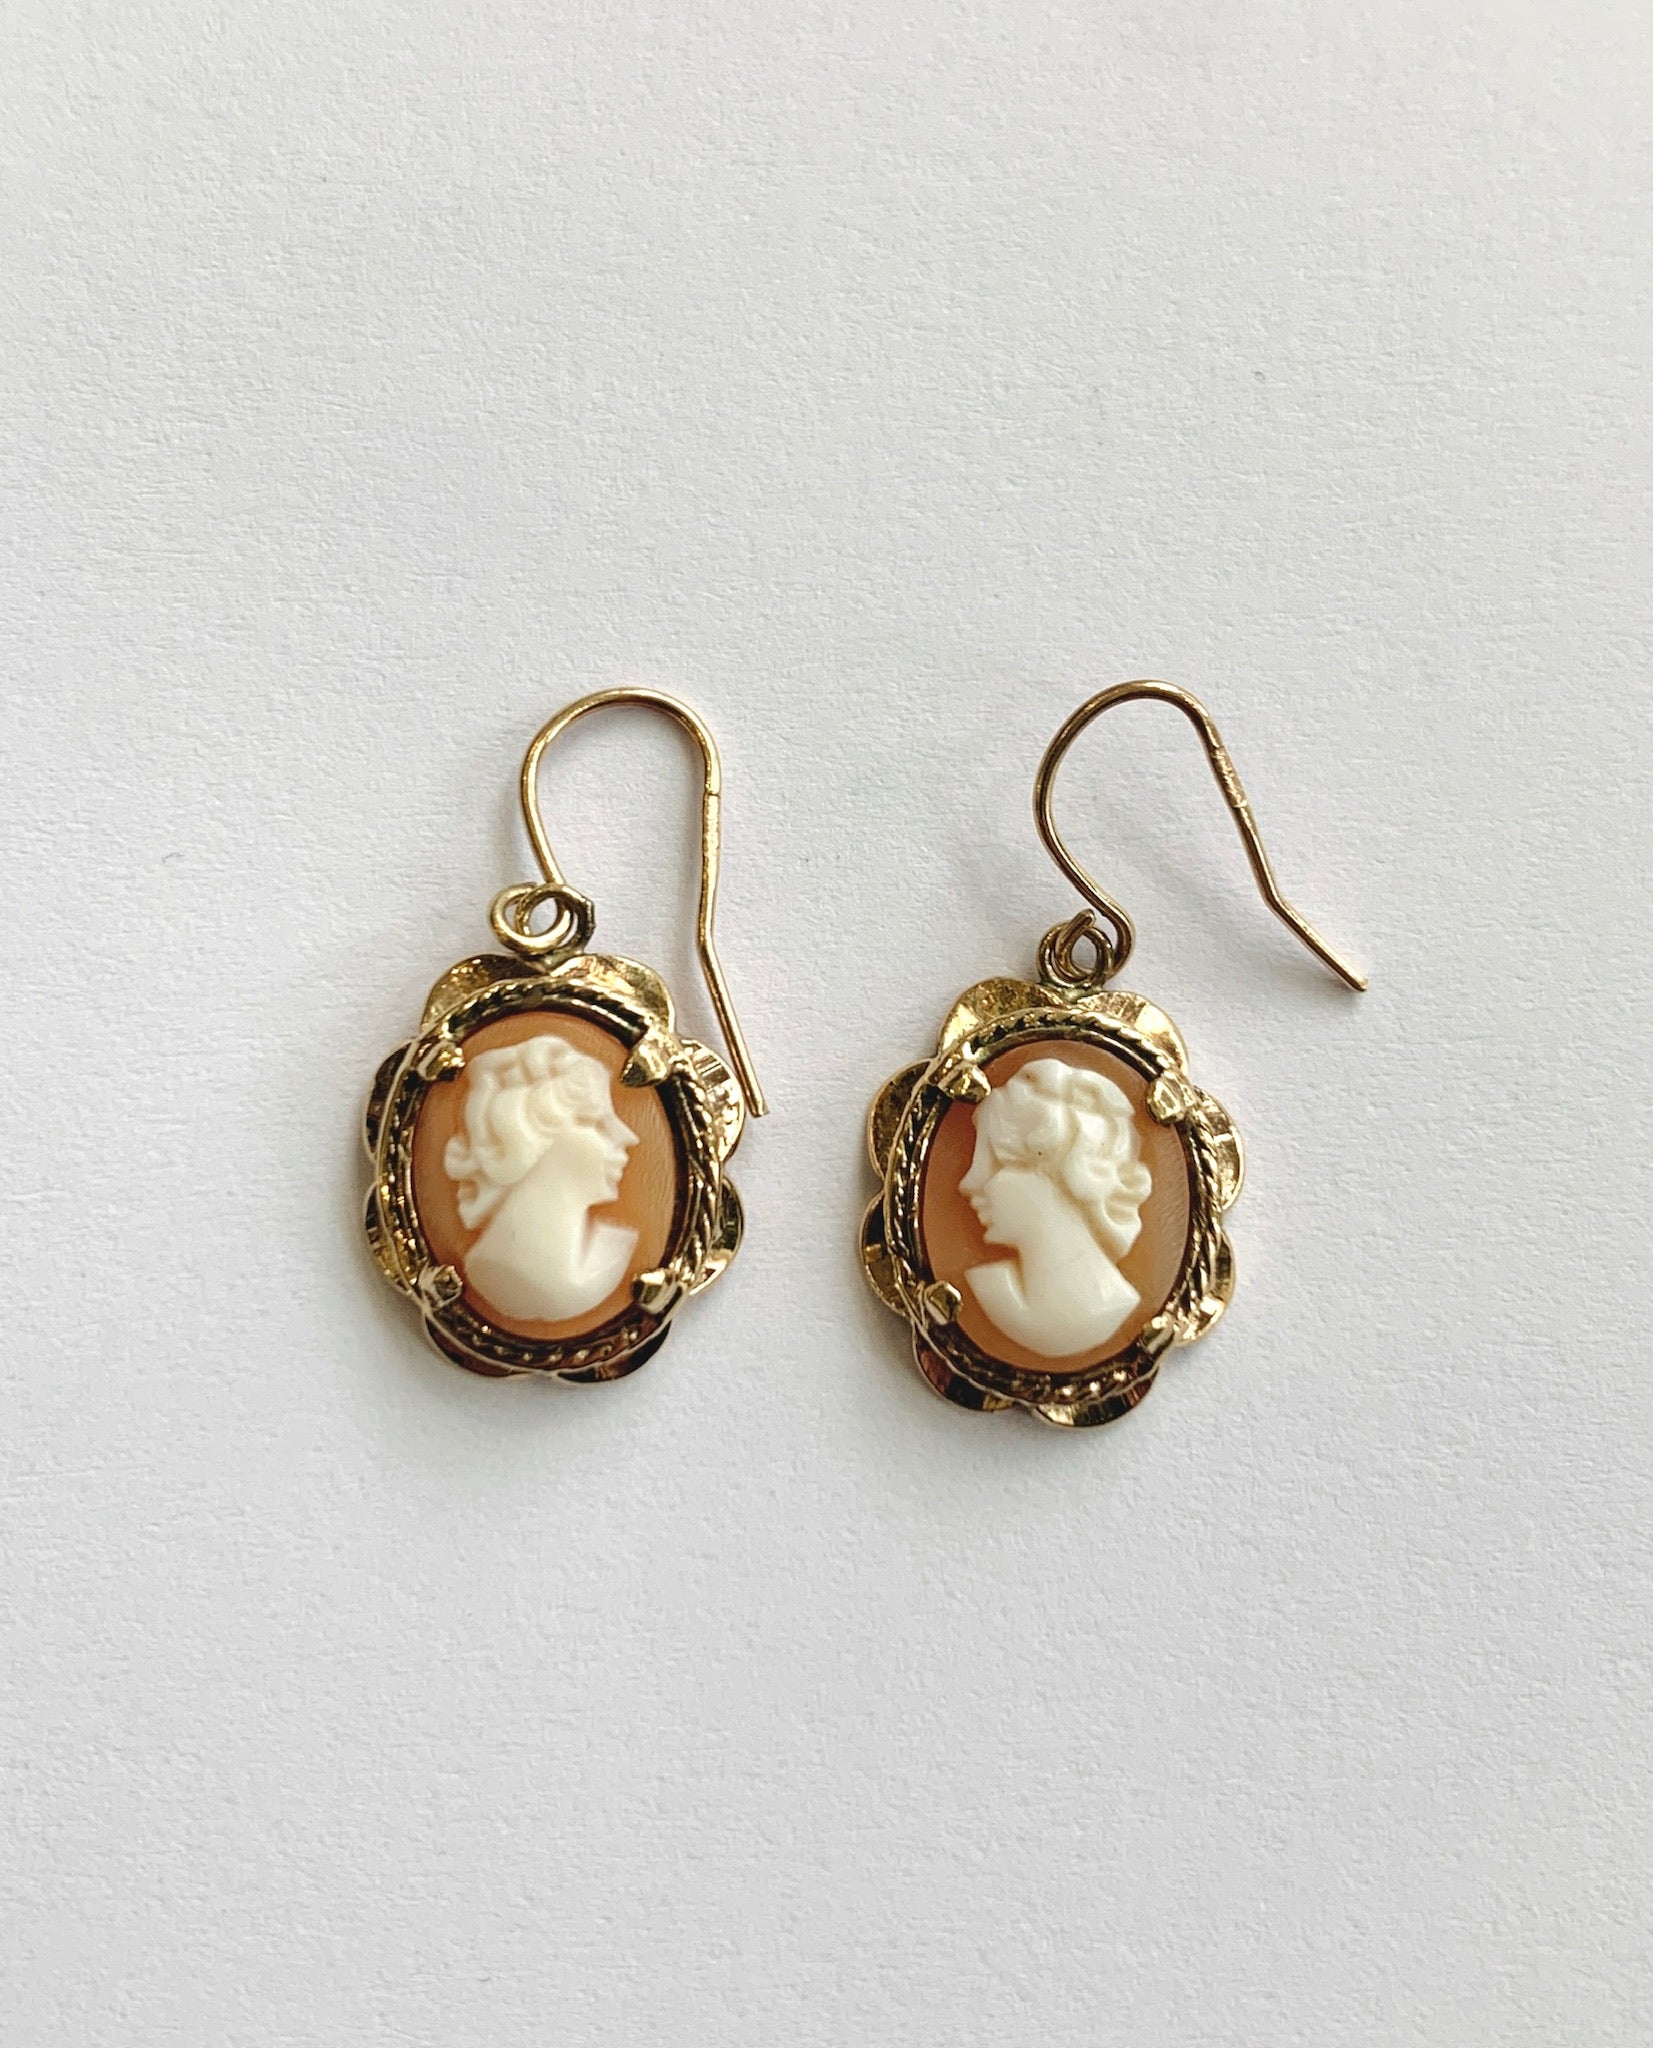 Vintage Cameo Earrings 9ct Gold